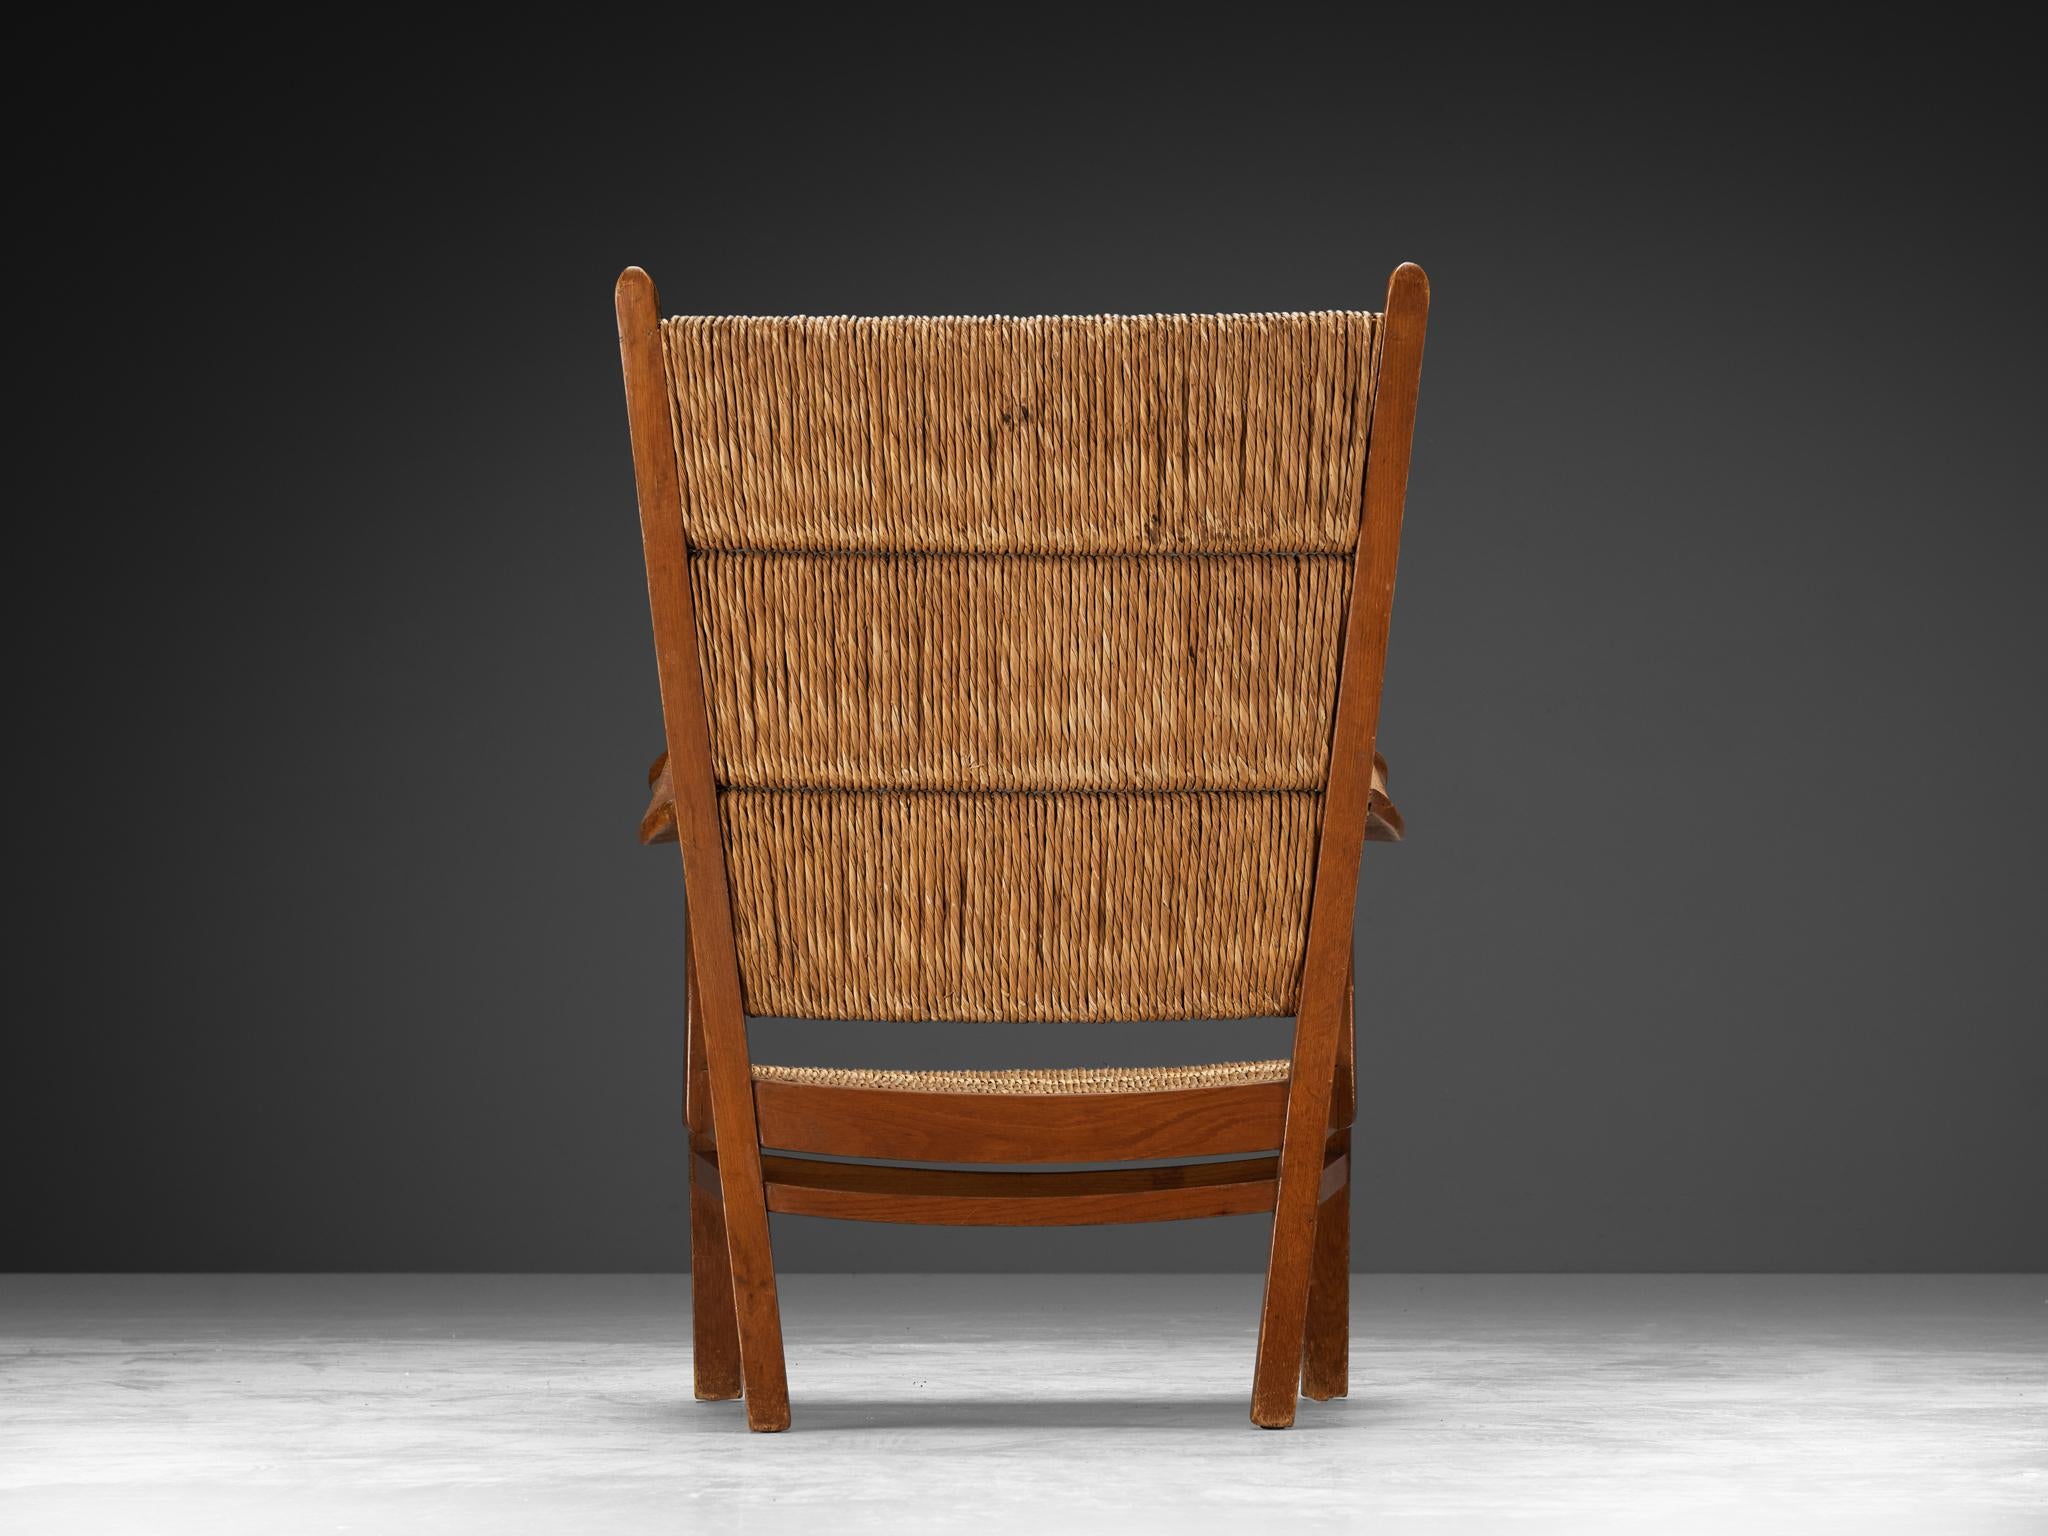 Pair of Lounge Chairs in Woven Straw and Wood